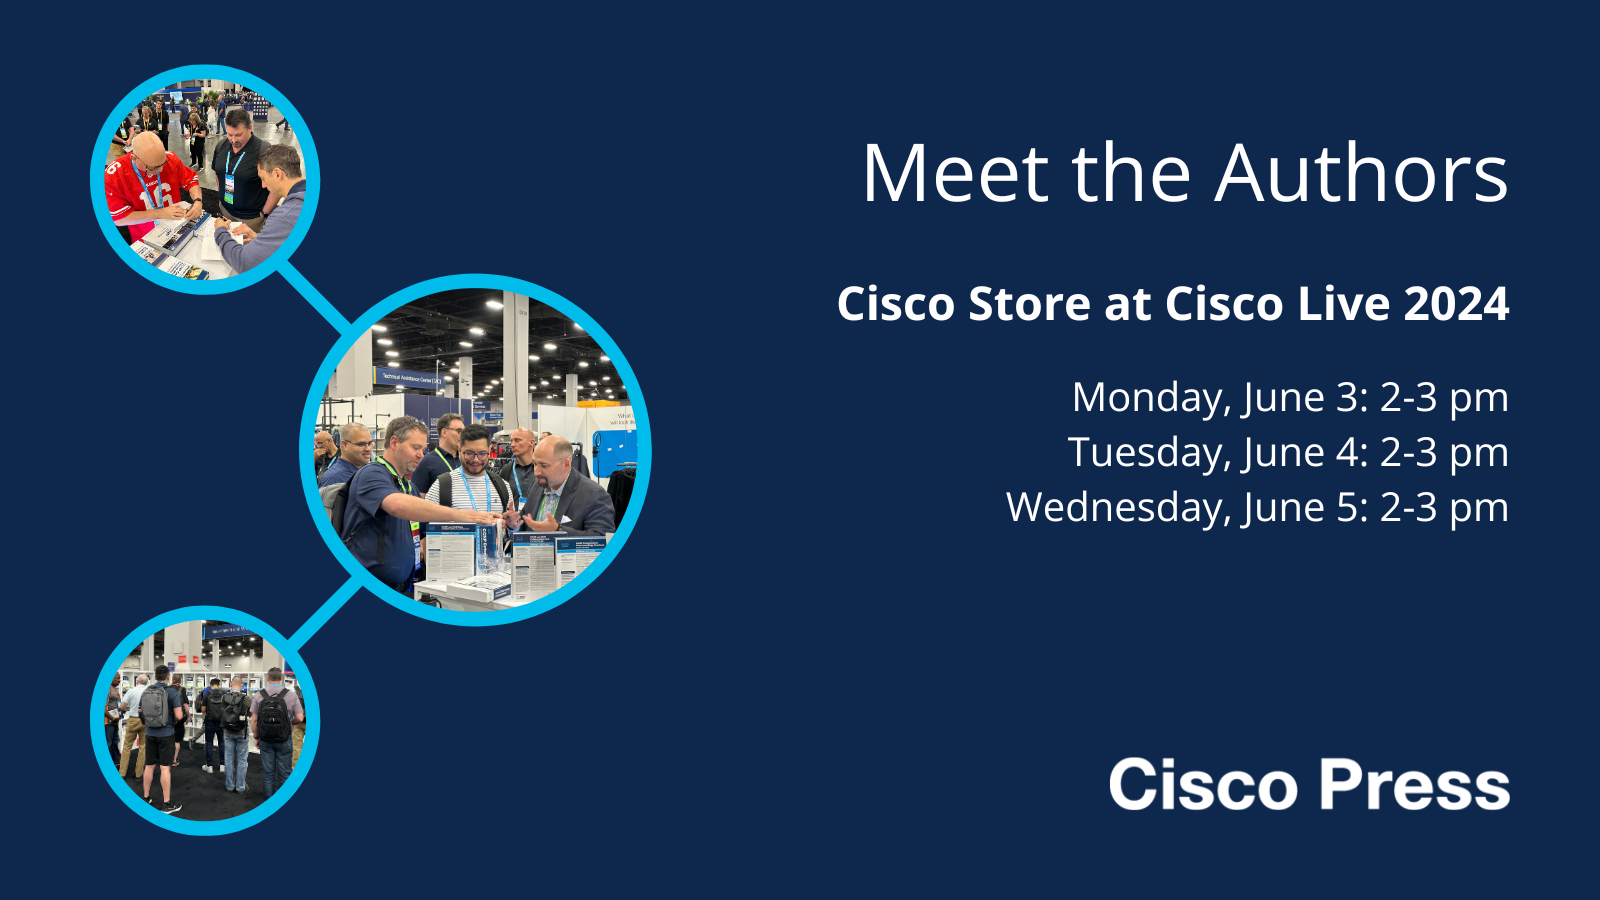 Meet the Authors at Cisco Live 2024